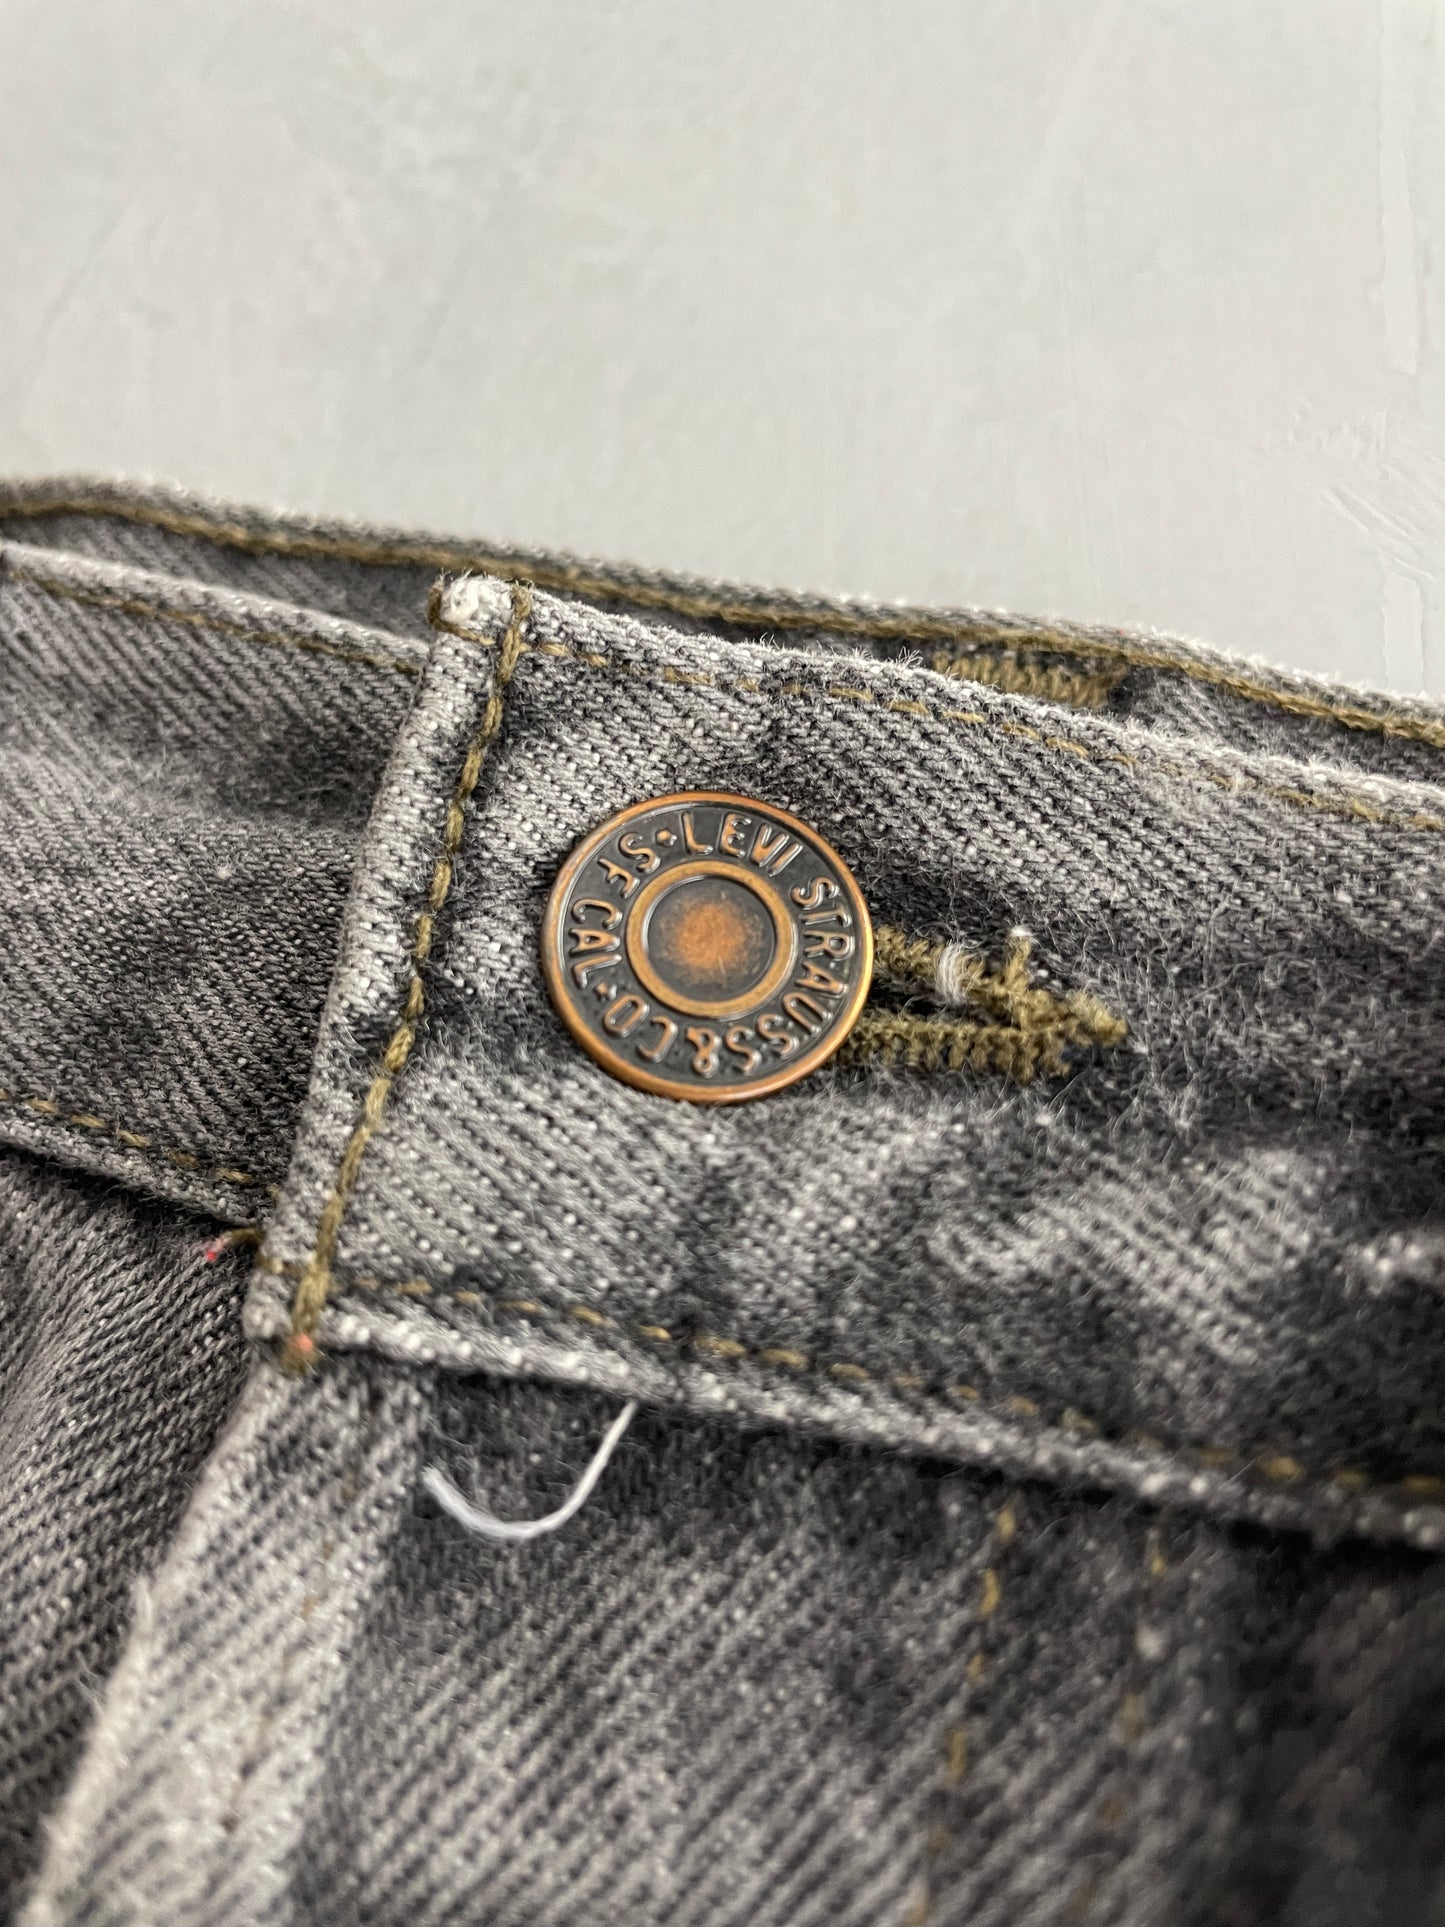 Made in USA Levi's 501's [31"]